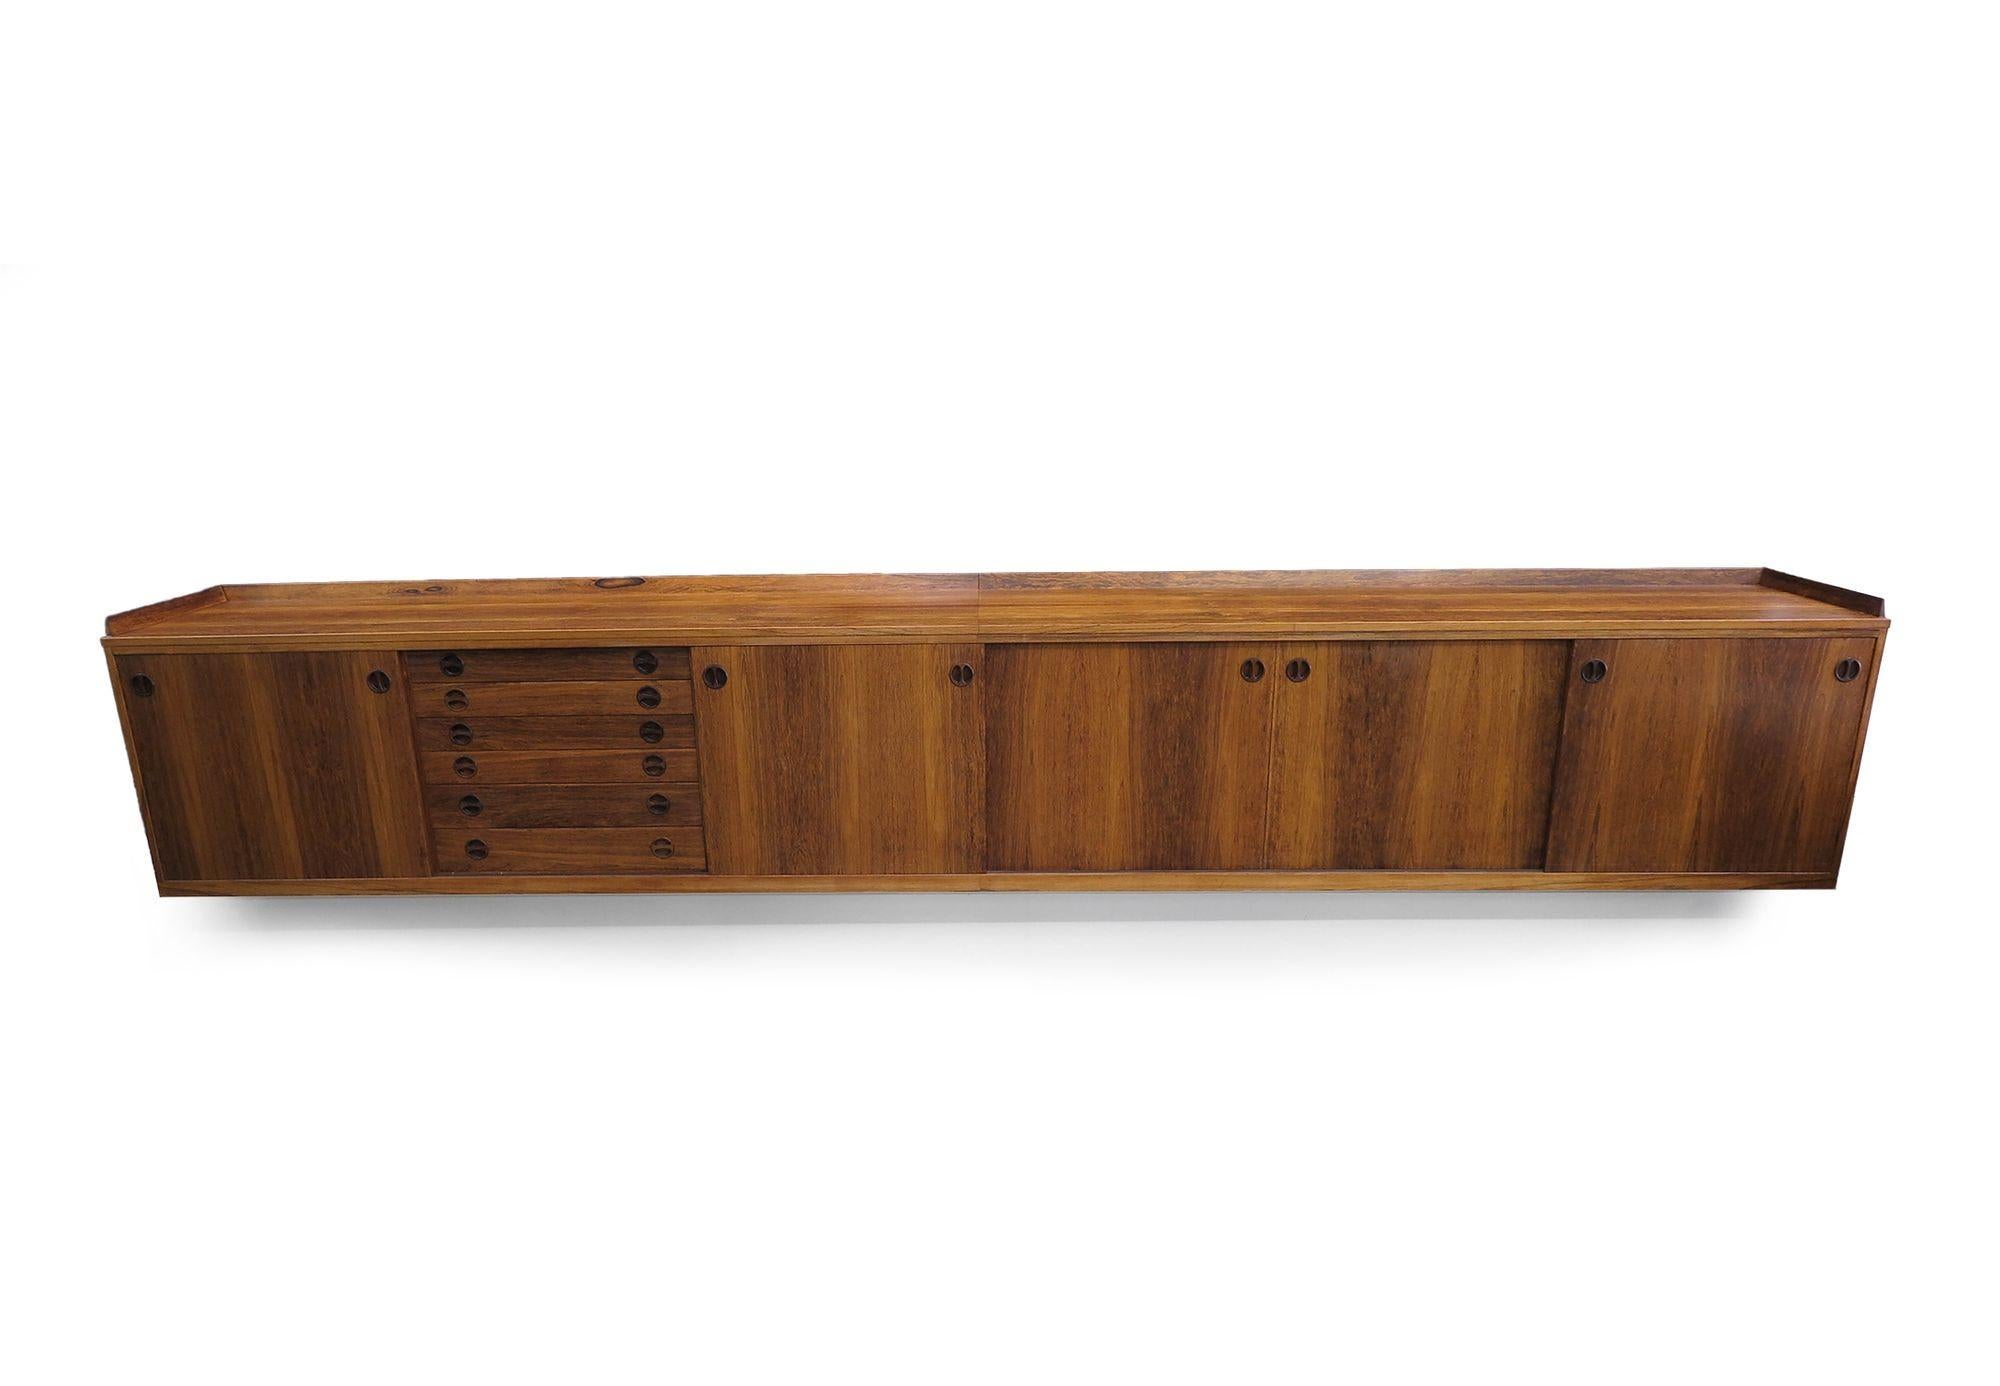 Impressive 1950s 13-foot wall-mount credenza with five sliding doors and six drawers, each adorned with carved recessed pulls. Crafted with meticulous attention to detail, it features railed trim, mitered corners, and dovetail joinery, showcasing